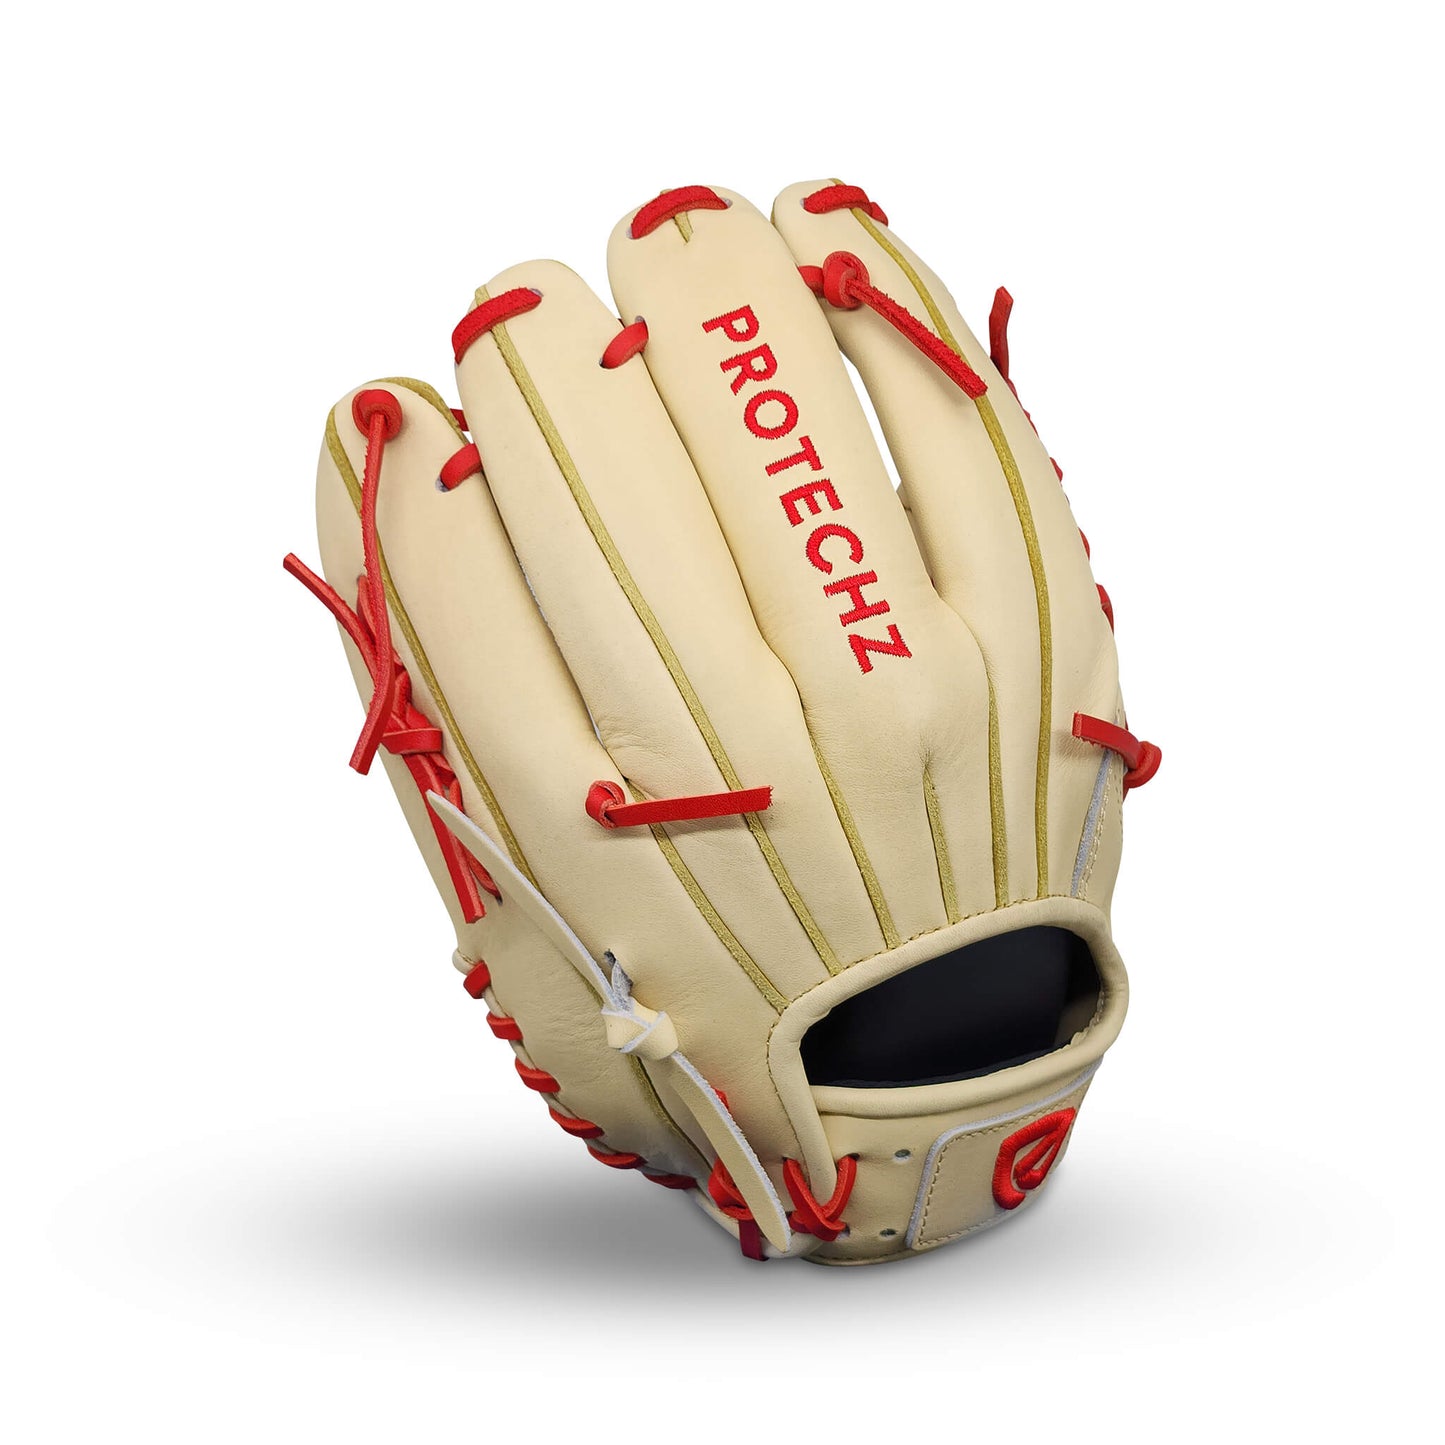 Titan Series Limited Edition 11.75” Infield Glove with T-Web, Camel Shell and Palm, Red Lacing, and Embroidered Texas Flag – RHT